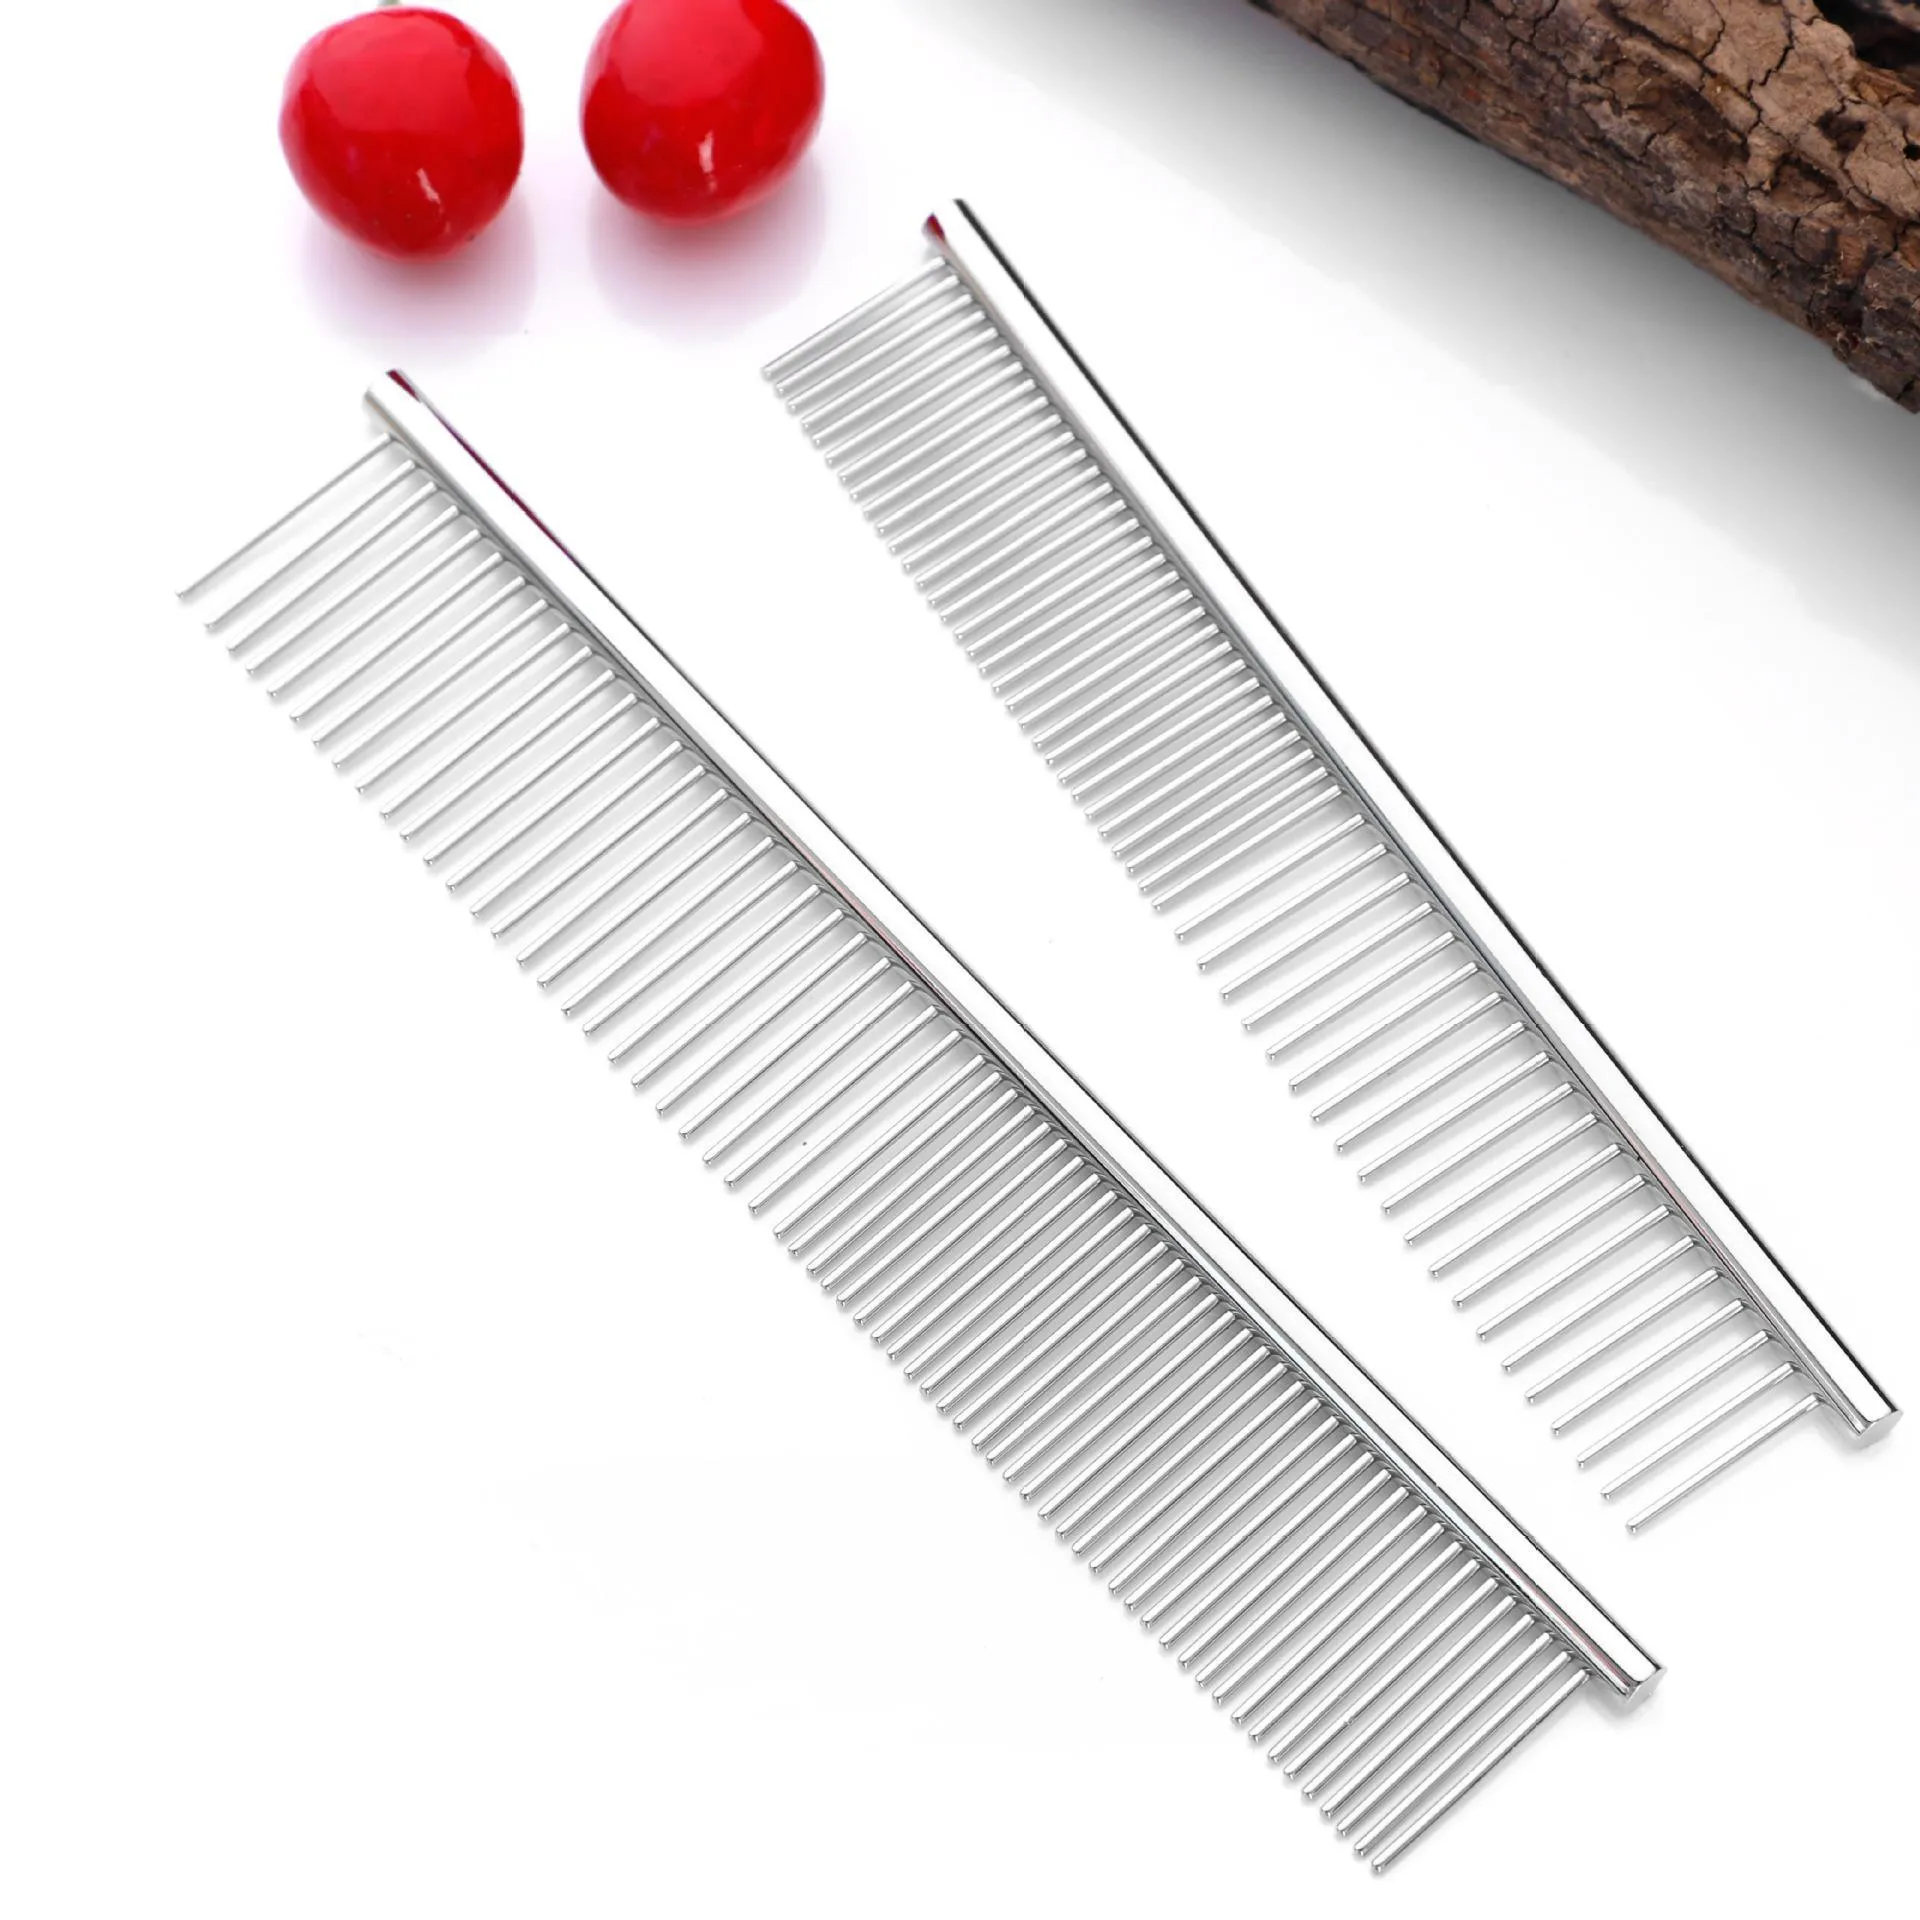 Stainless Steel Pet Combs Cat Dog Grooming beauty tools Professional Tool Rounded Teeth for Removing Knots Tangles FHL461-WLL